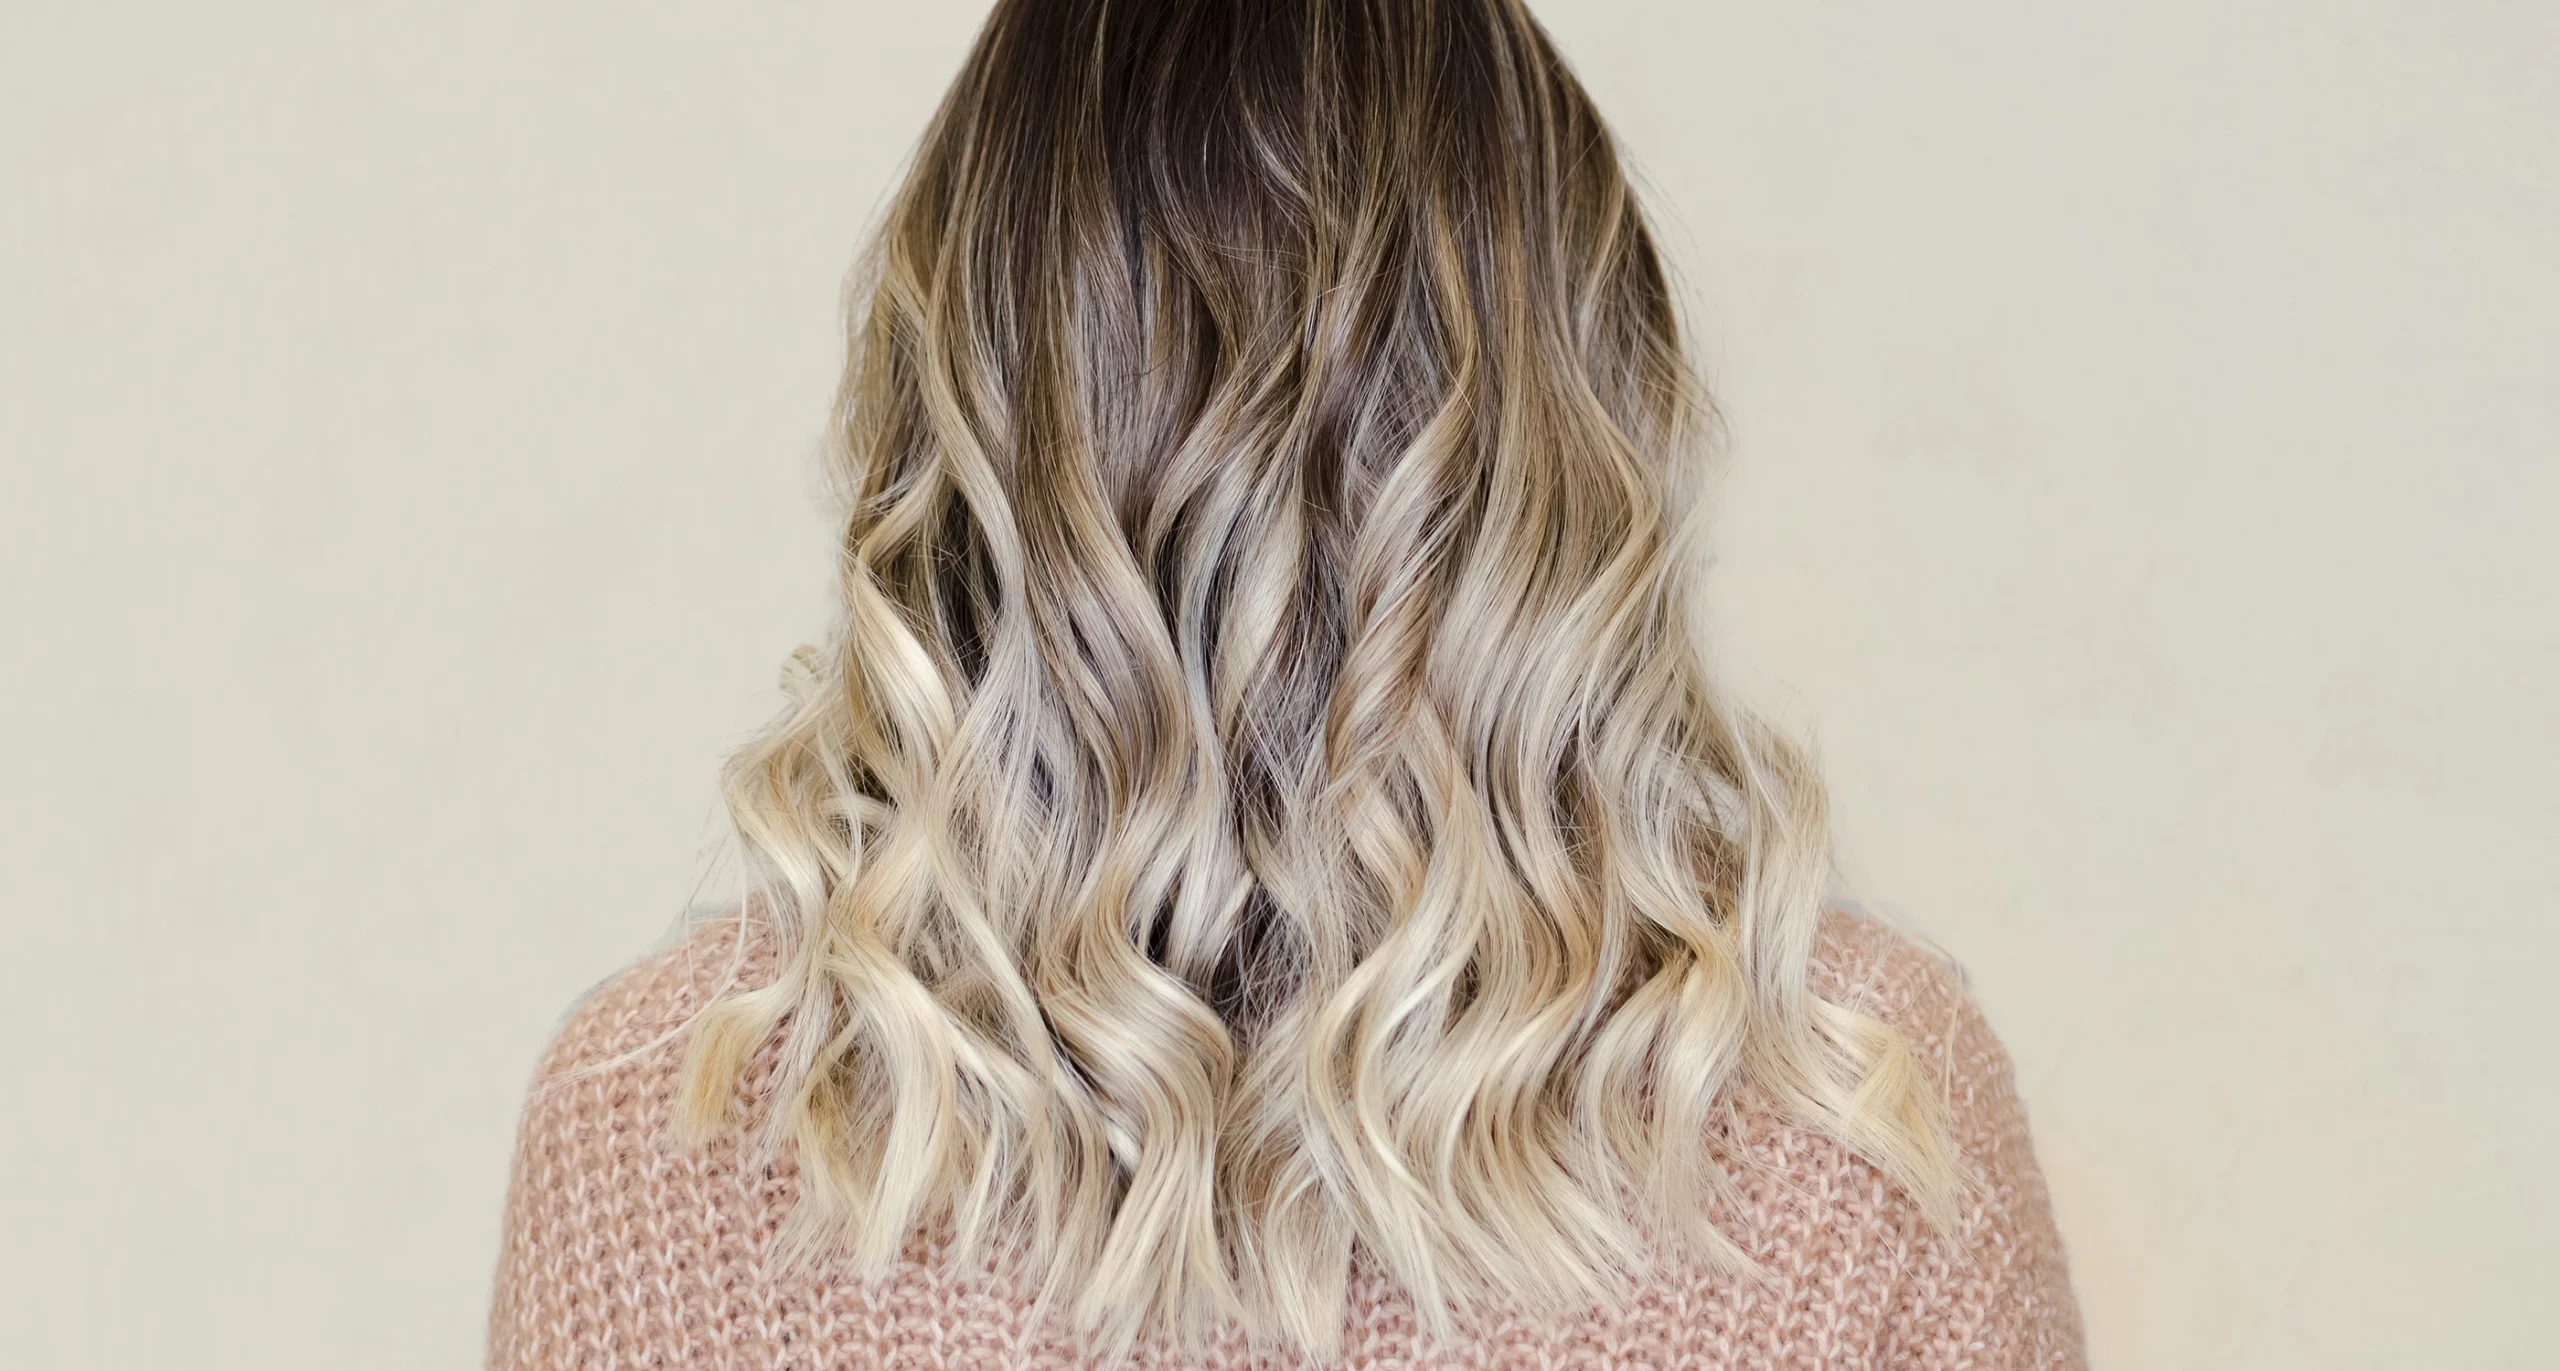 back of head showing wavy brunette and blonde ombre hair, person is wearing a knitted creme sweater